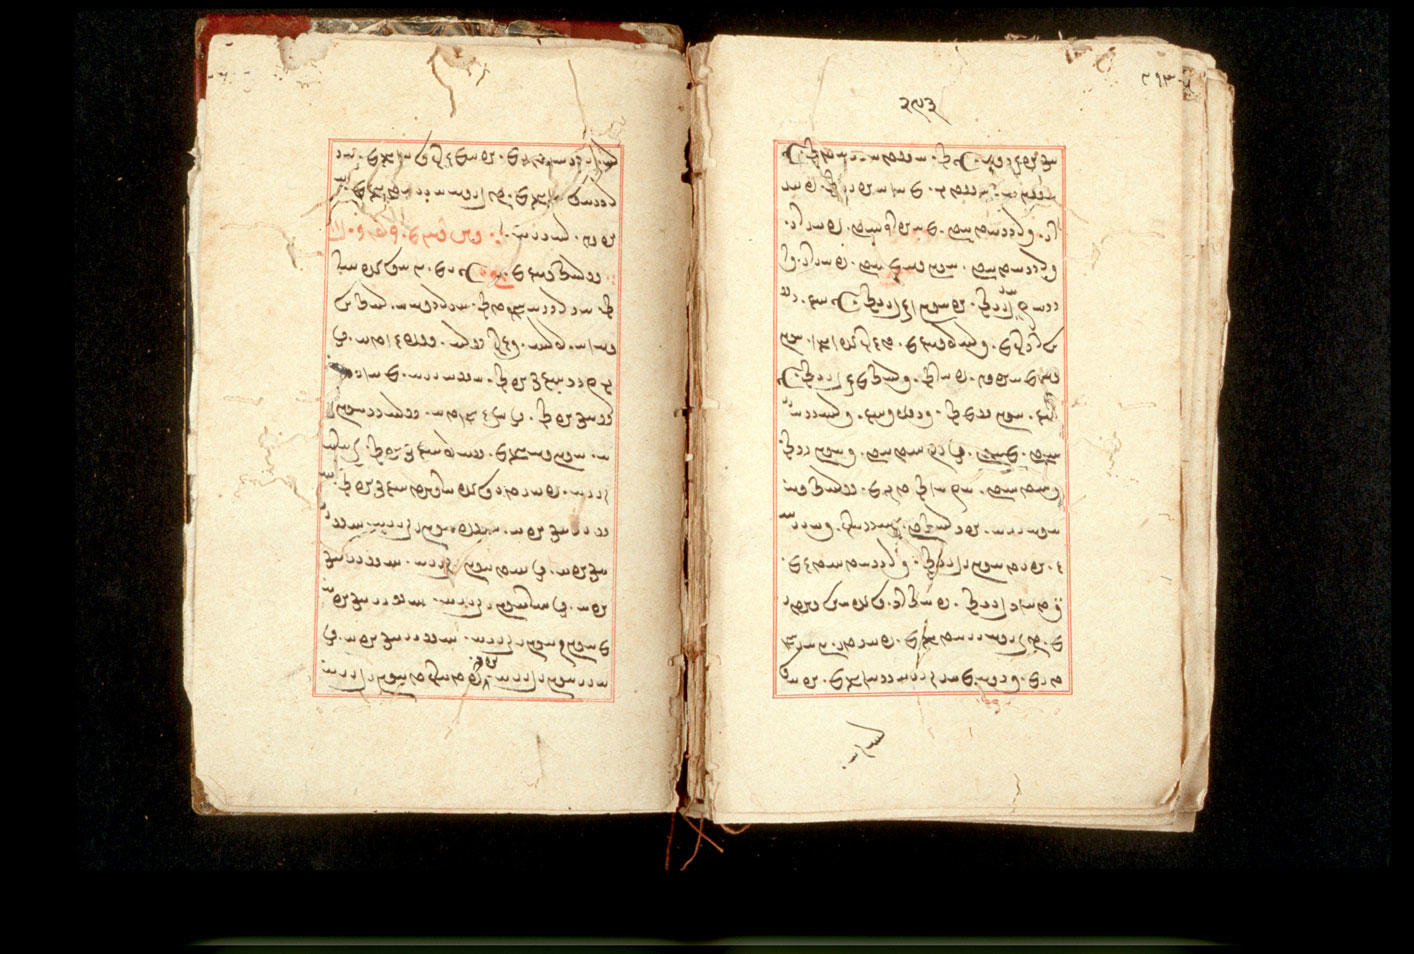 Folios 293v (right) and 294r (left)